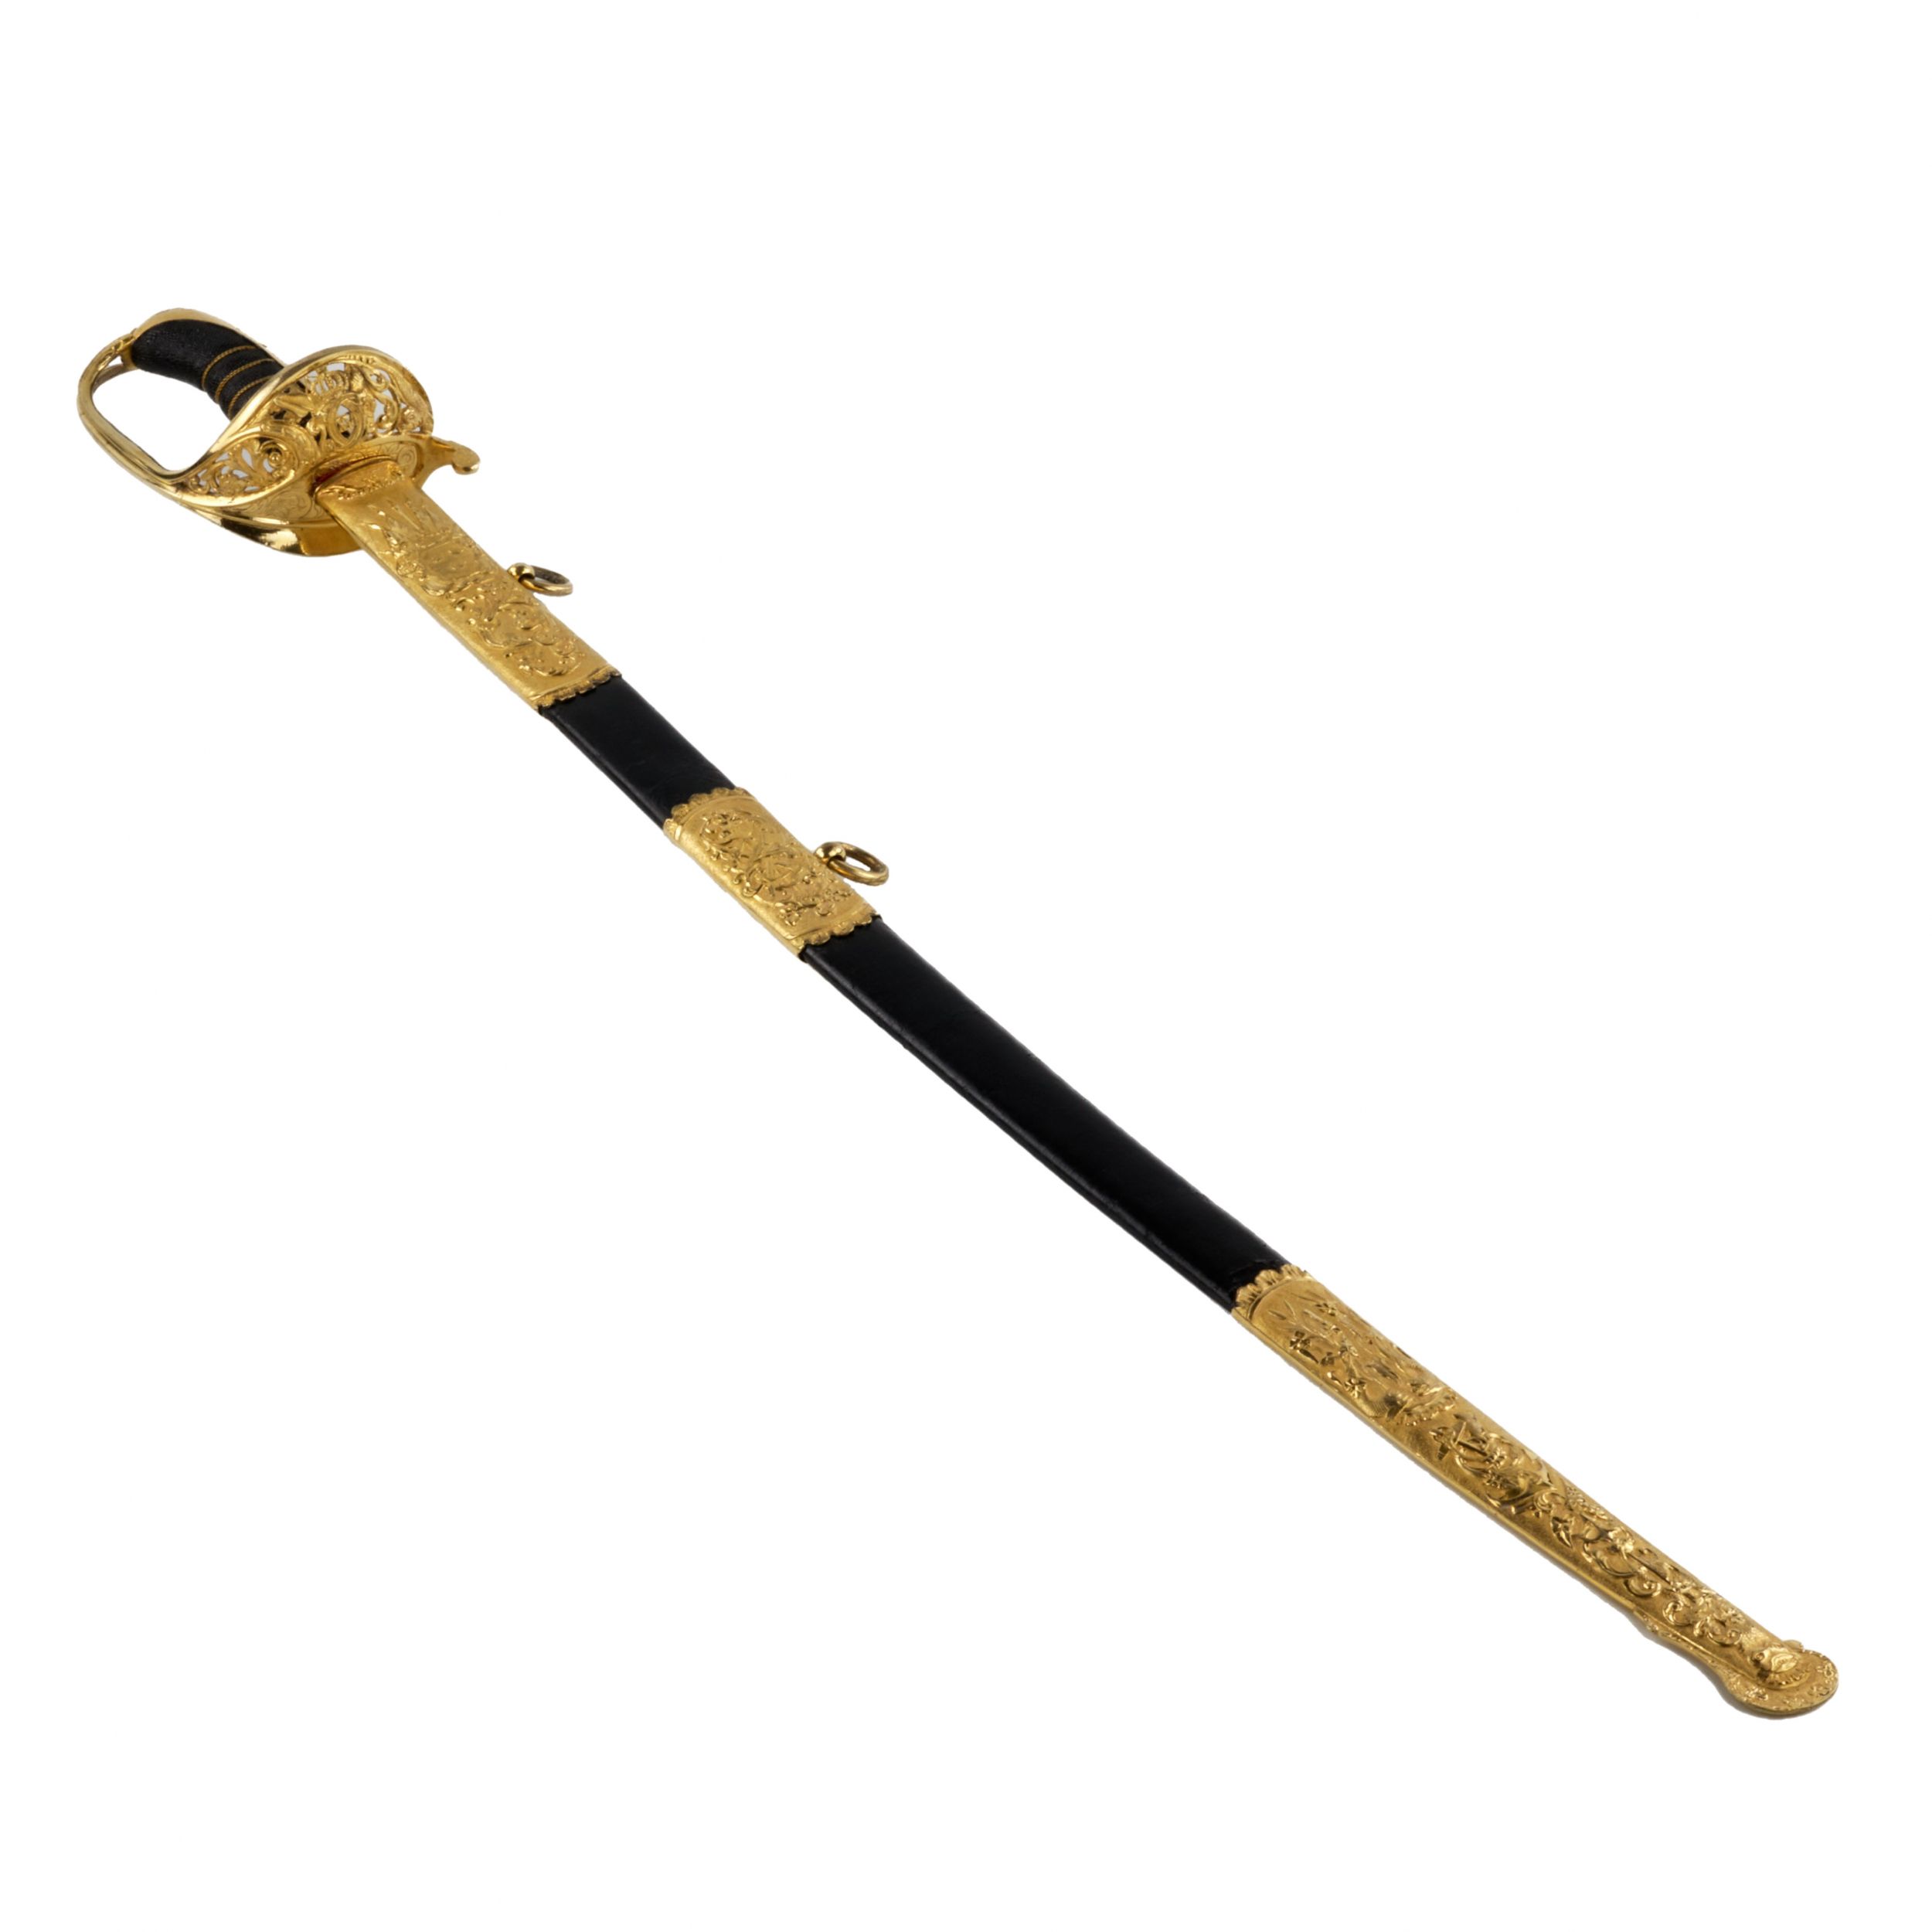 Saber-of-a-Swedish-naval-officer-second-half-of-the-19th-century-